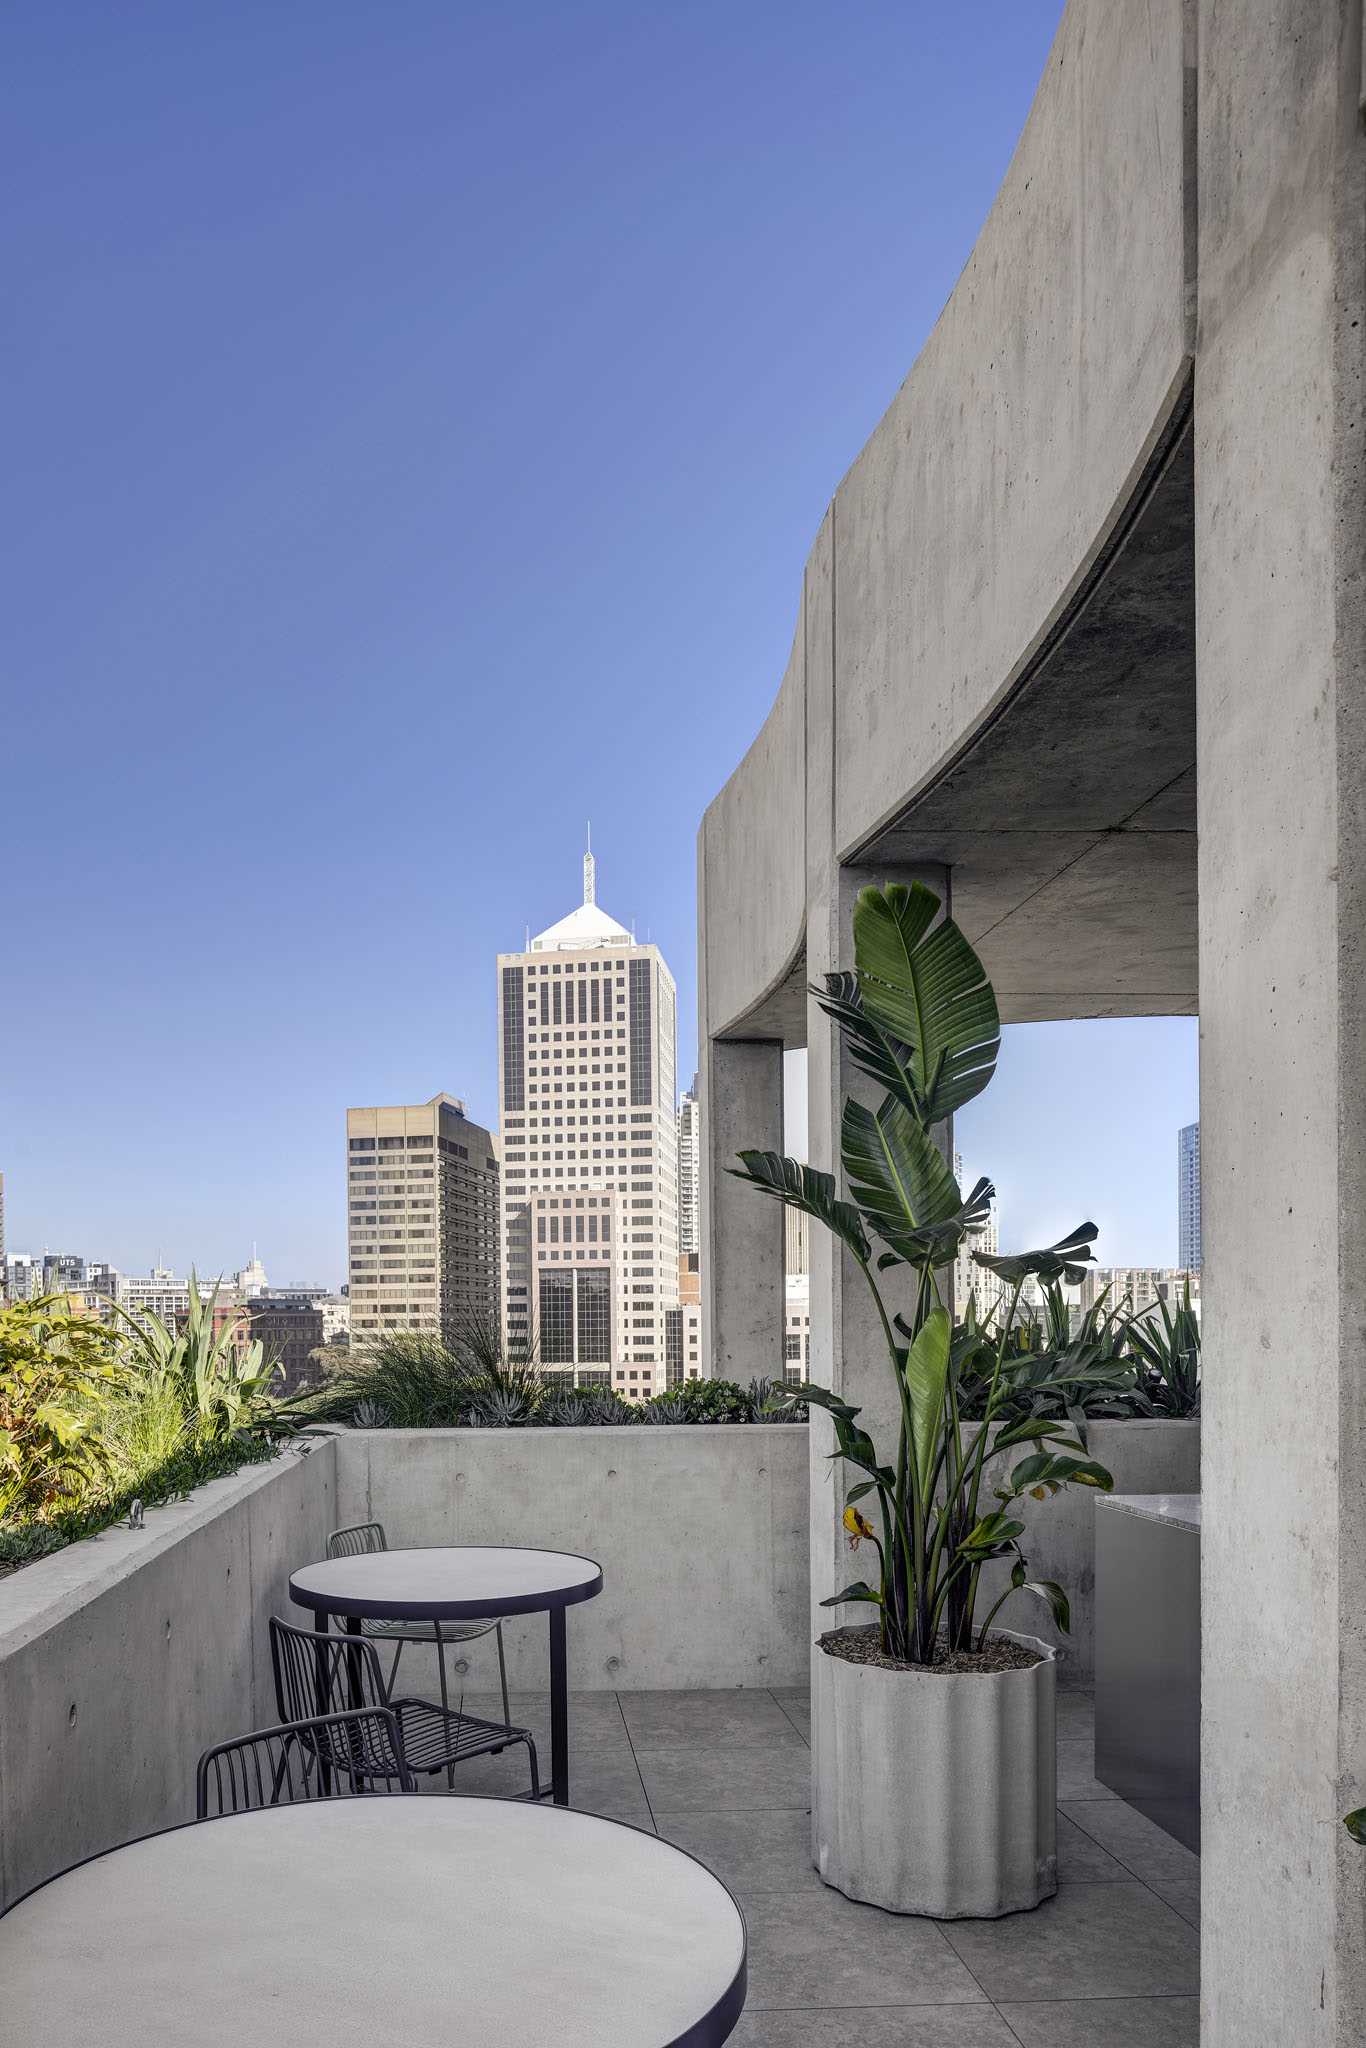 A rooftop patio with built-in and standalone concrete planters.